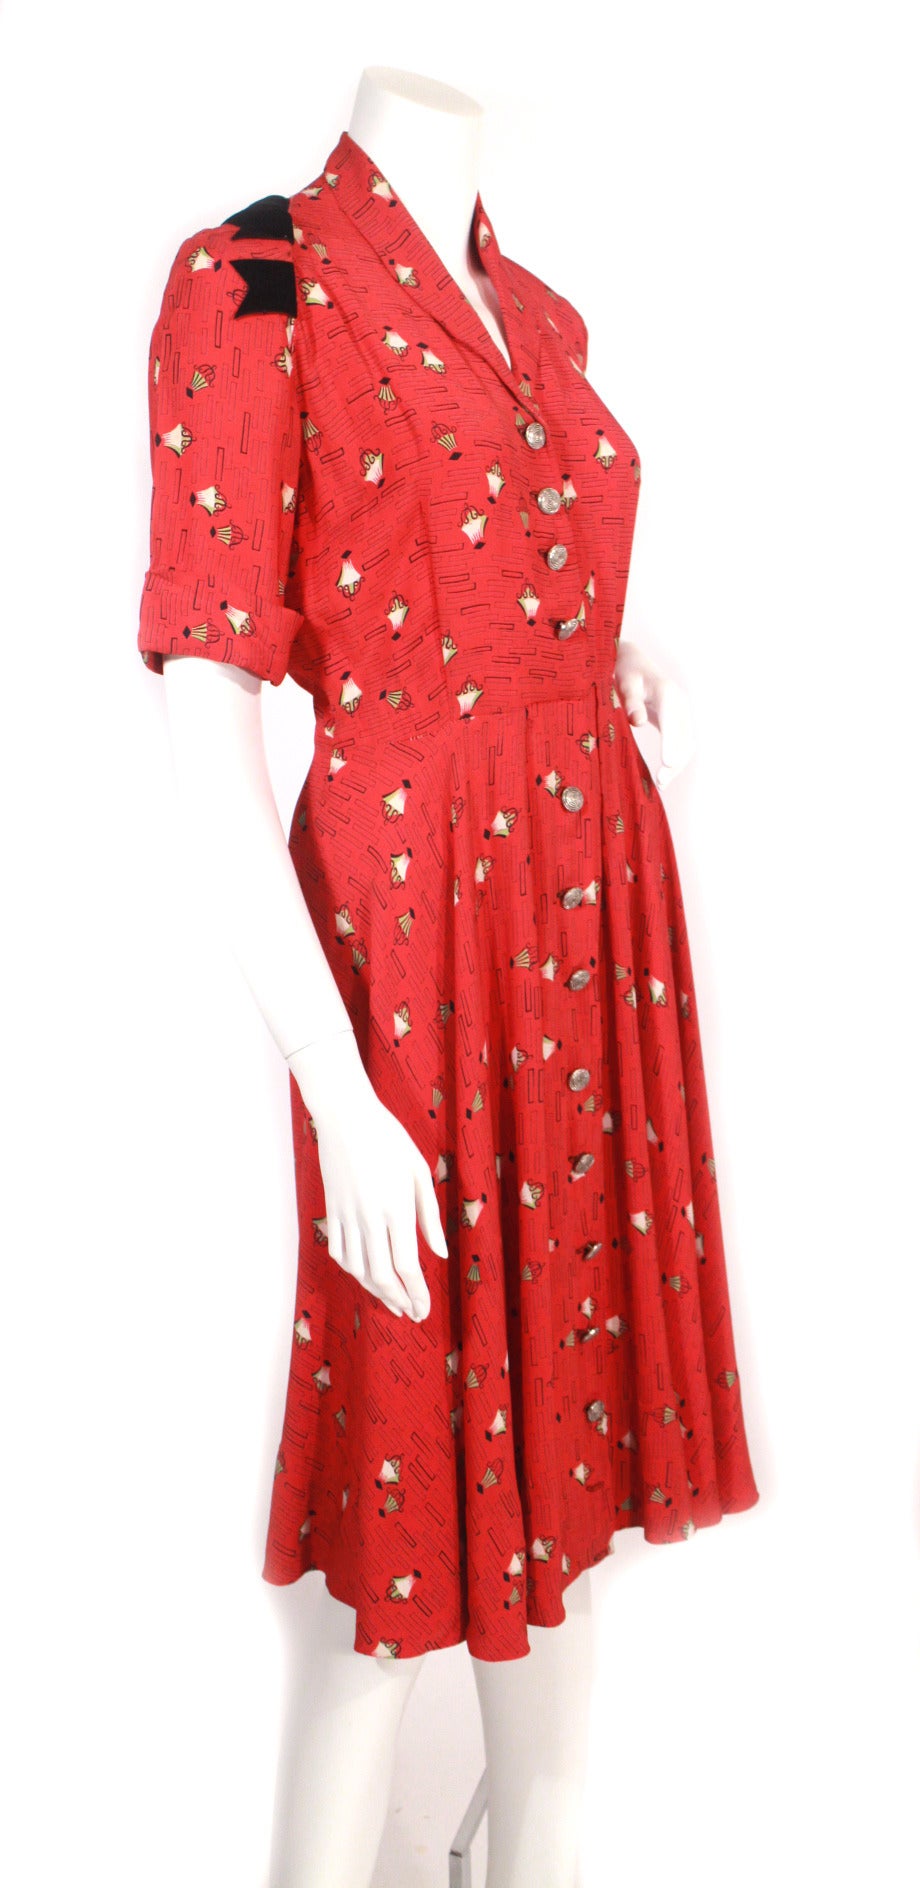 Vintage late 40s early 50s French red print dress. Decorative silver buttons, adorable print, pretty ribbon detail on right shoulder, perfect dress summer to fall.